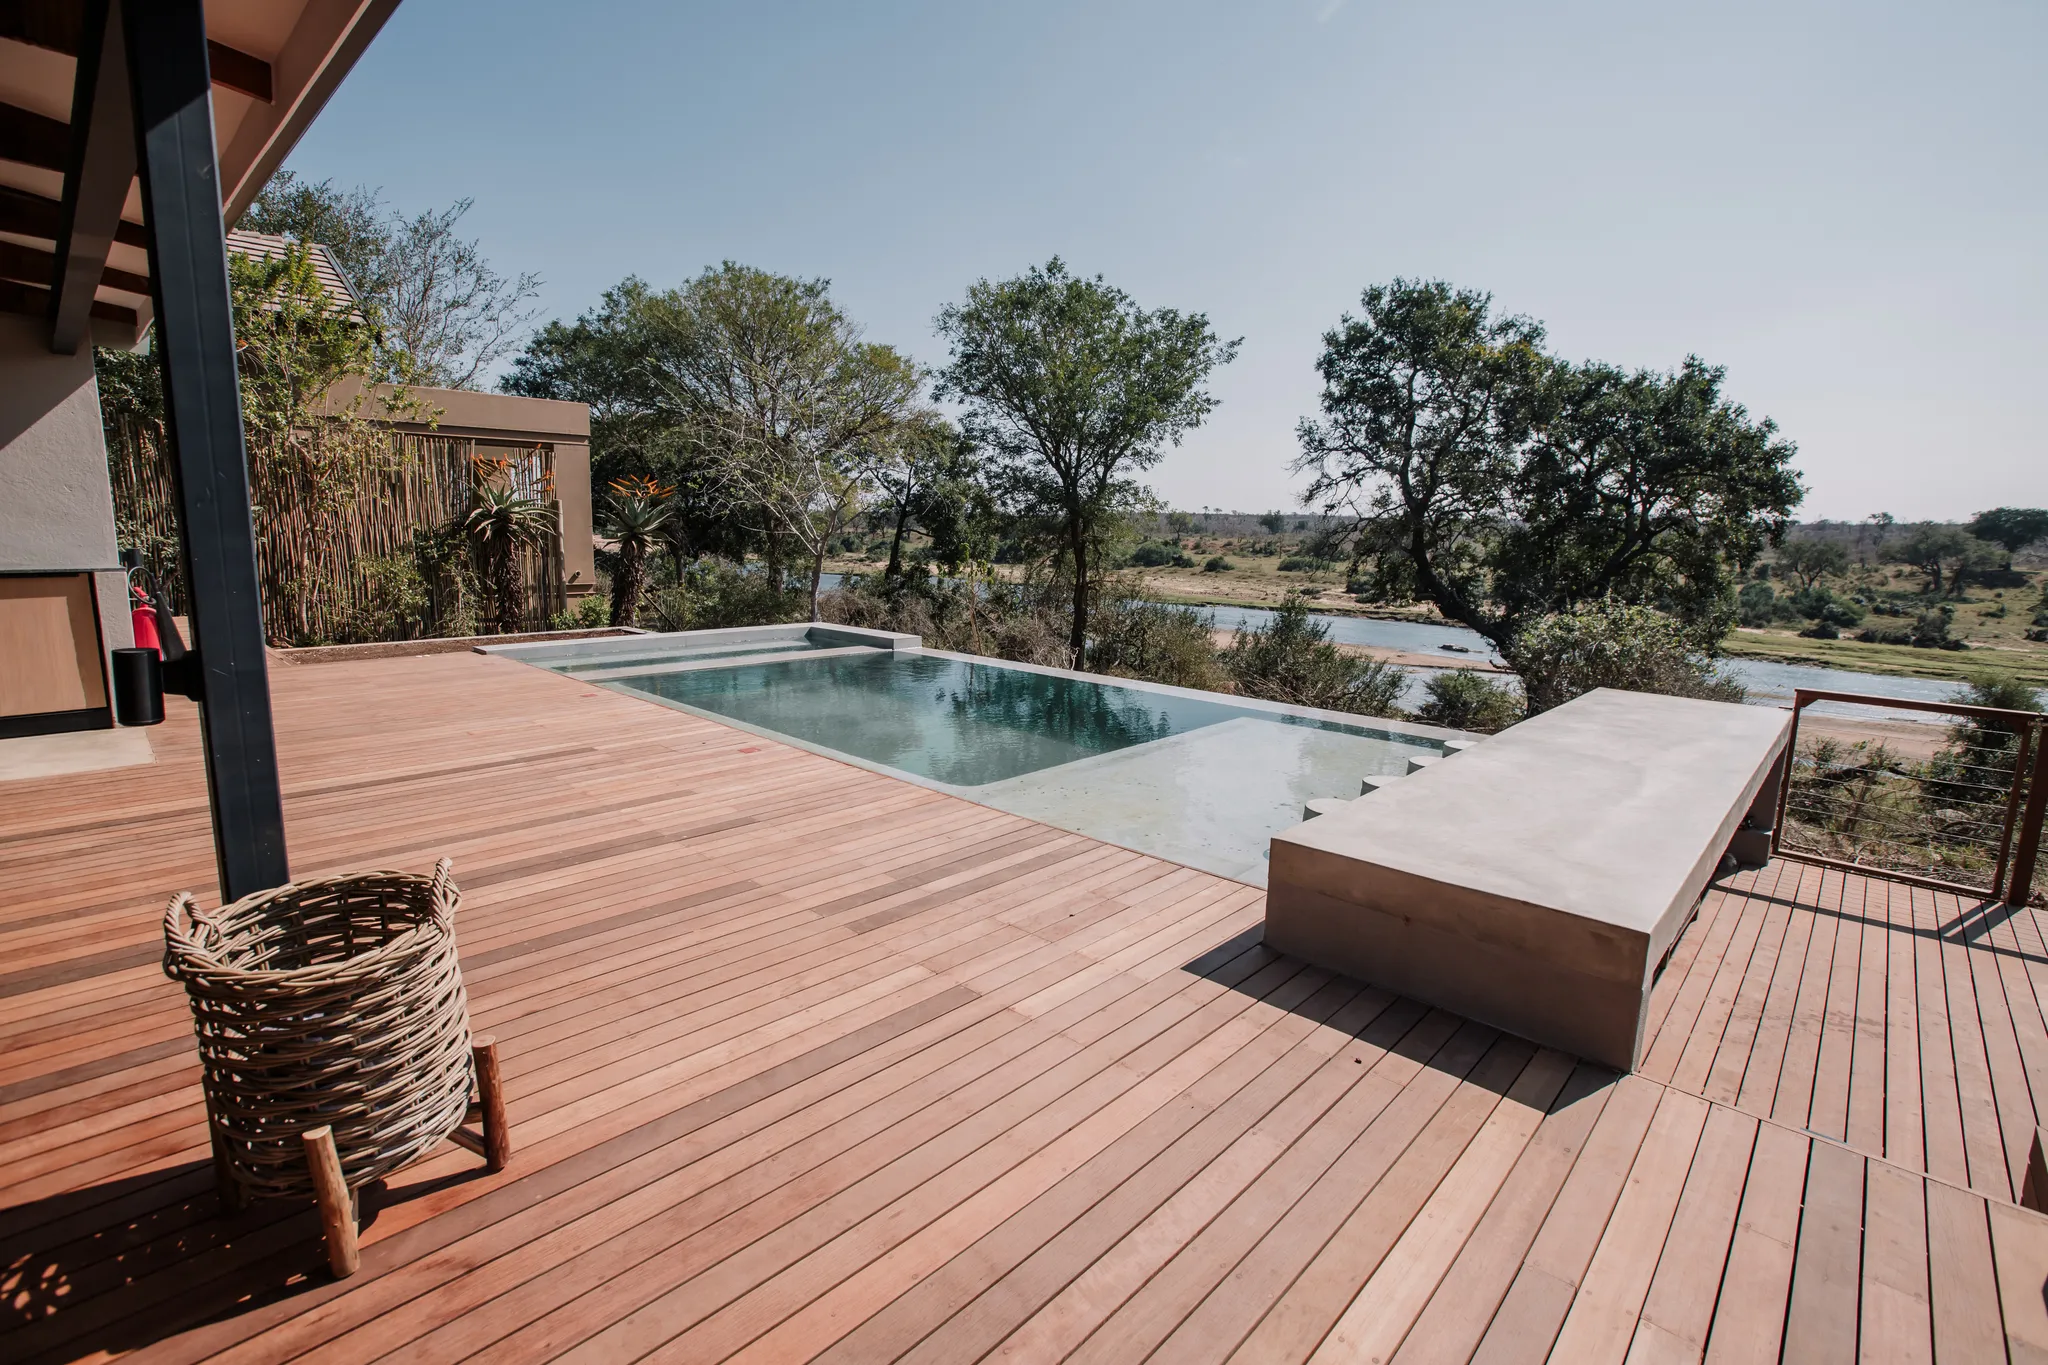 A pool area with a wooden deck and view of the surrounding nature.